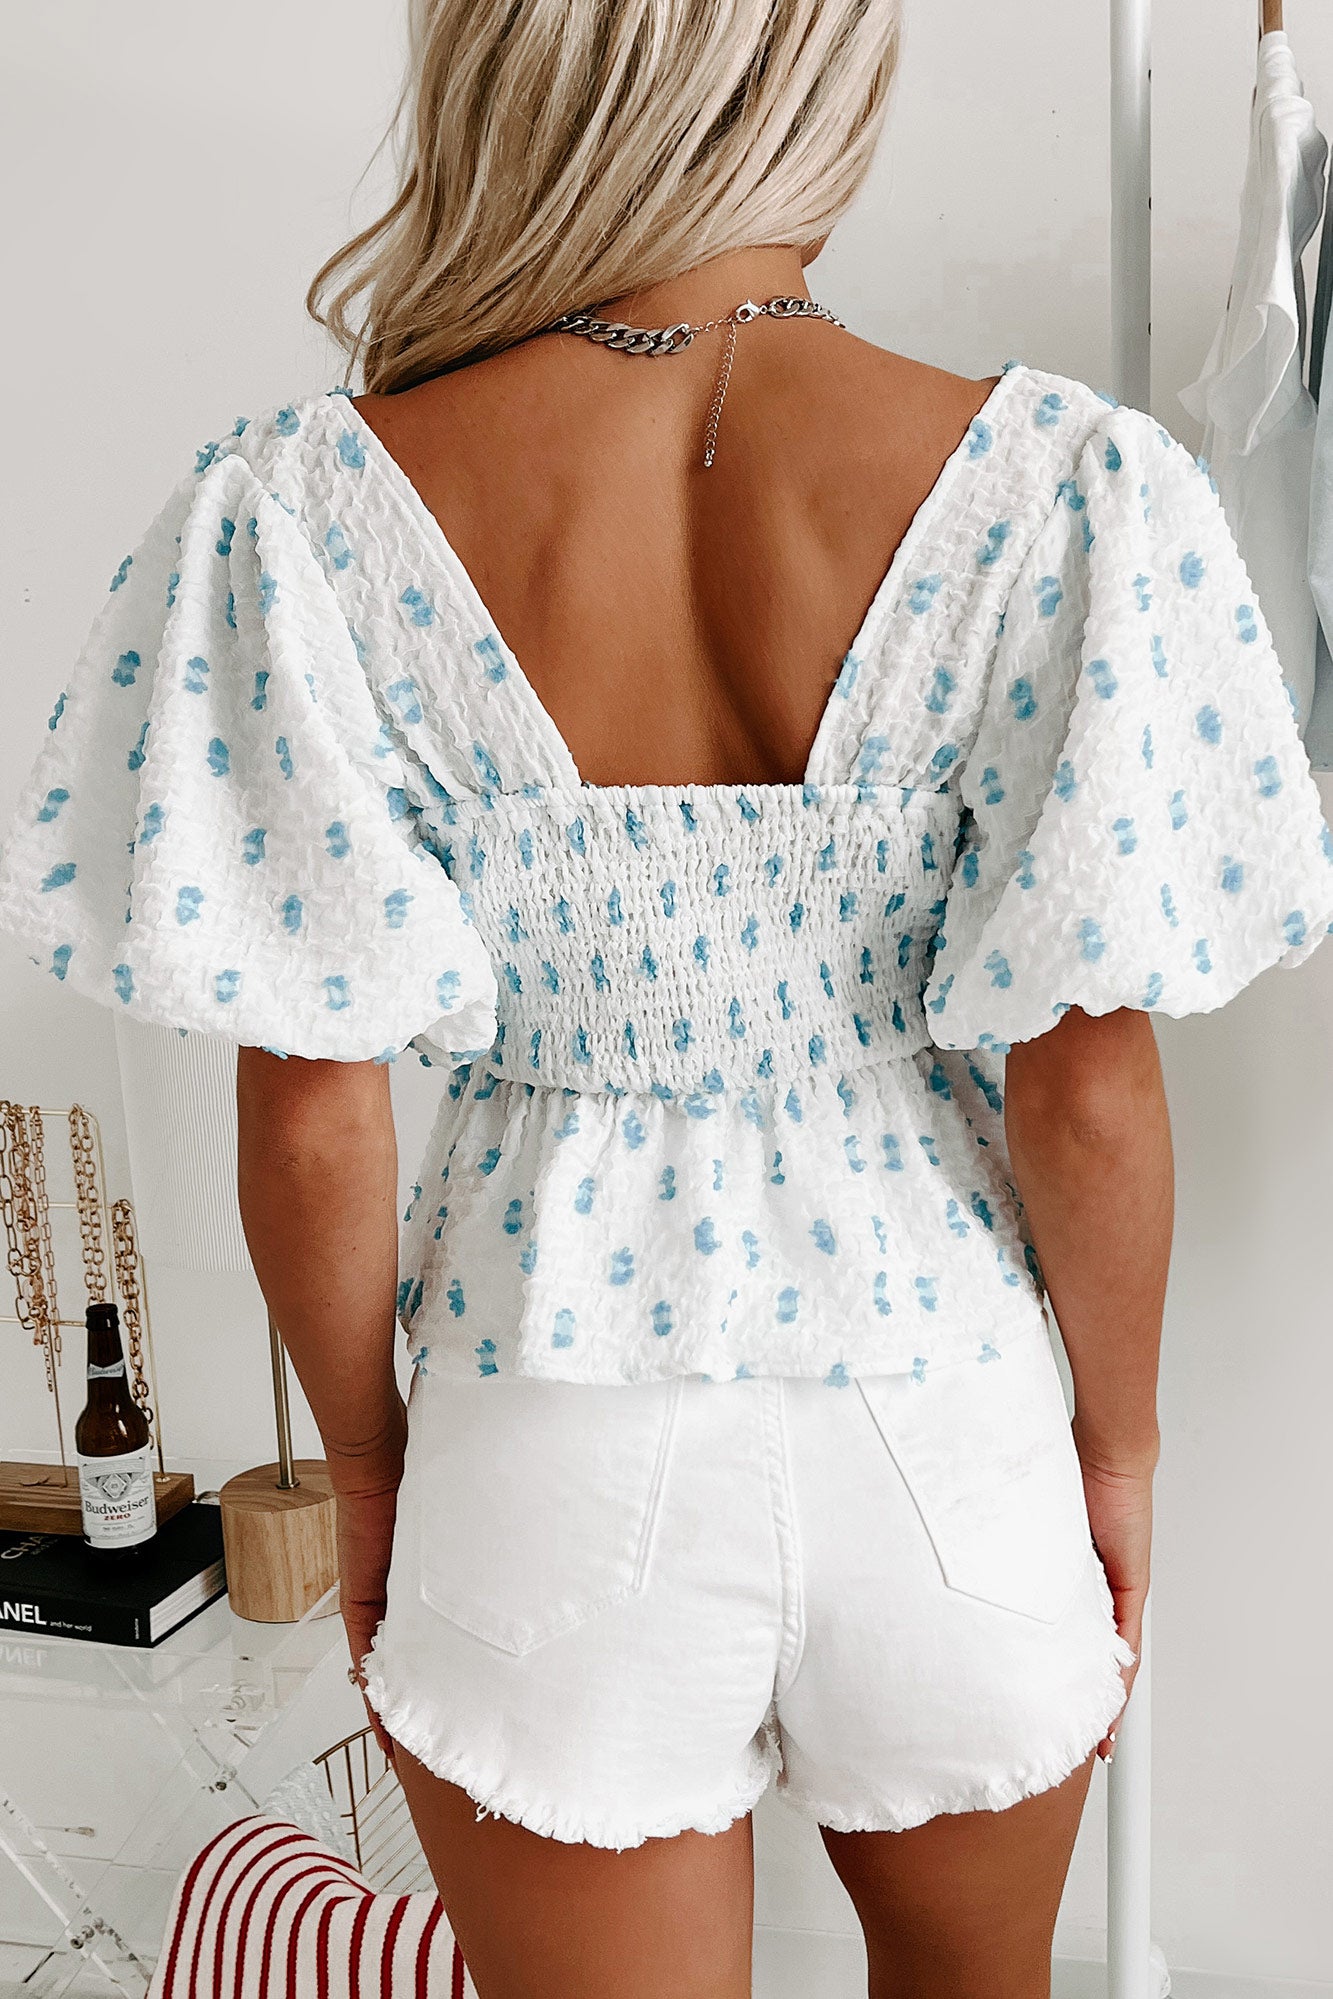 Stay Centered Puff Sleeve Top (White) - NanaMacs